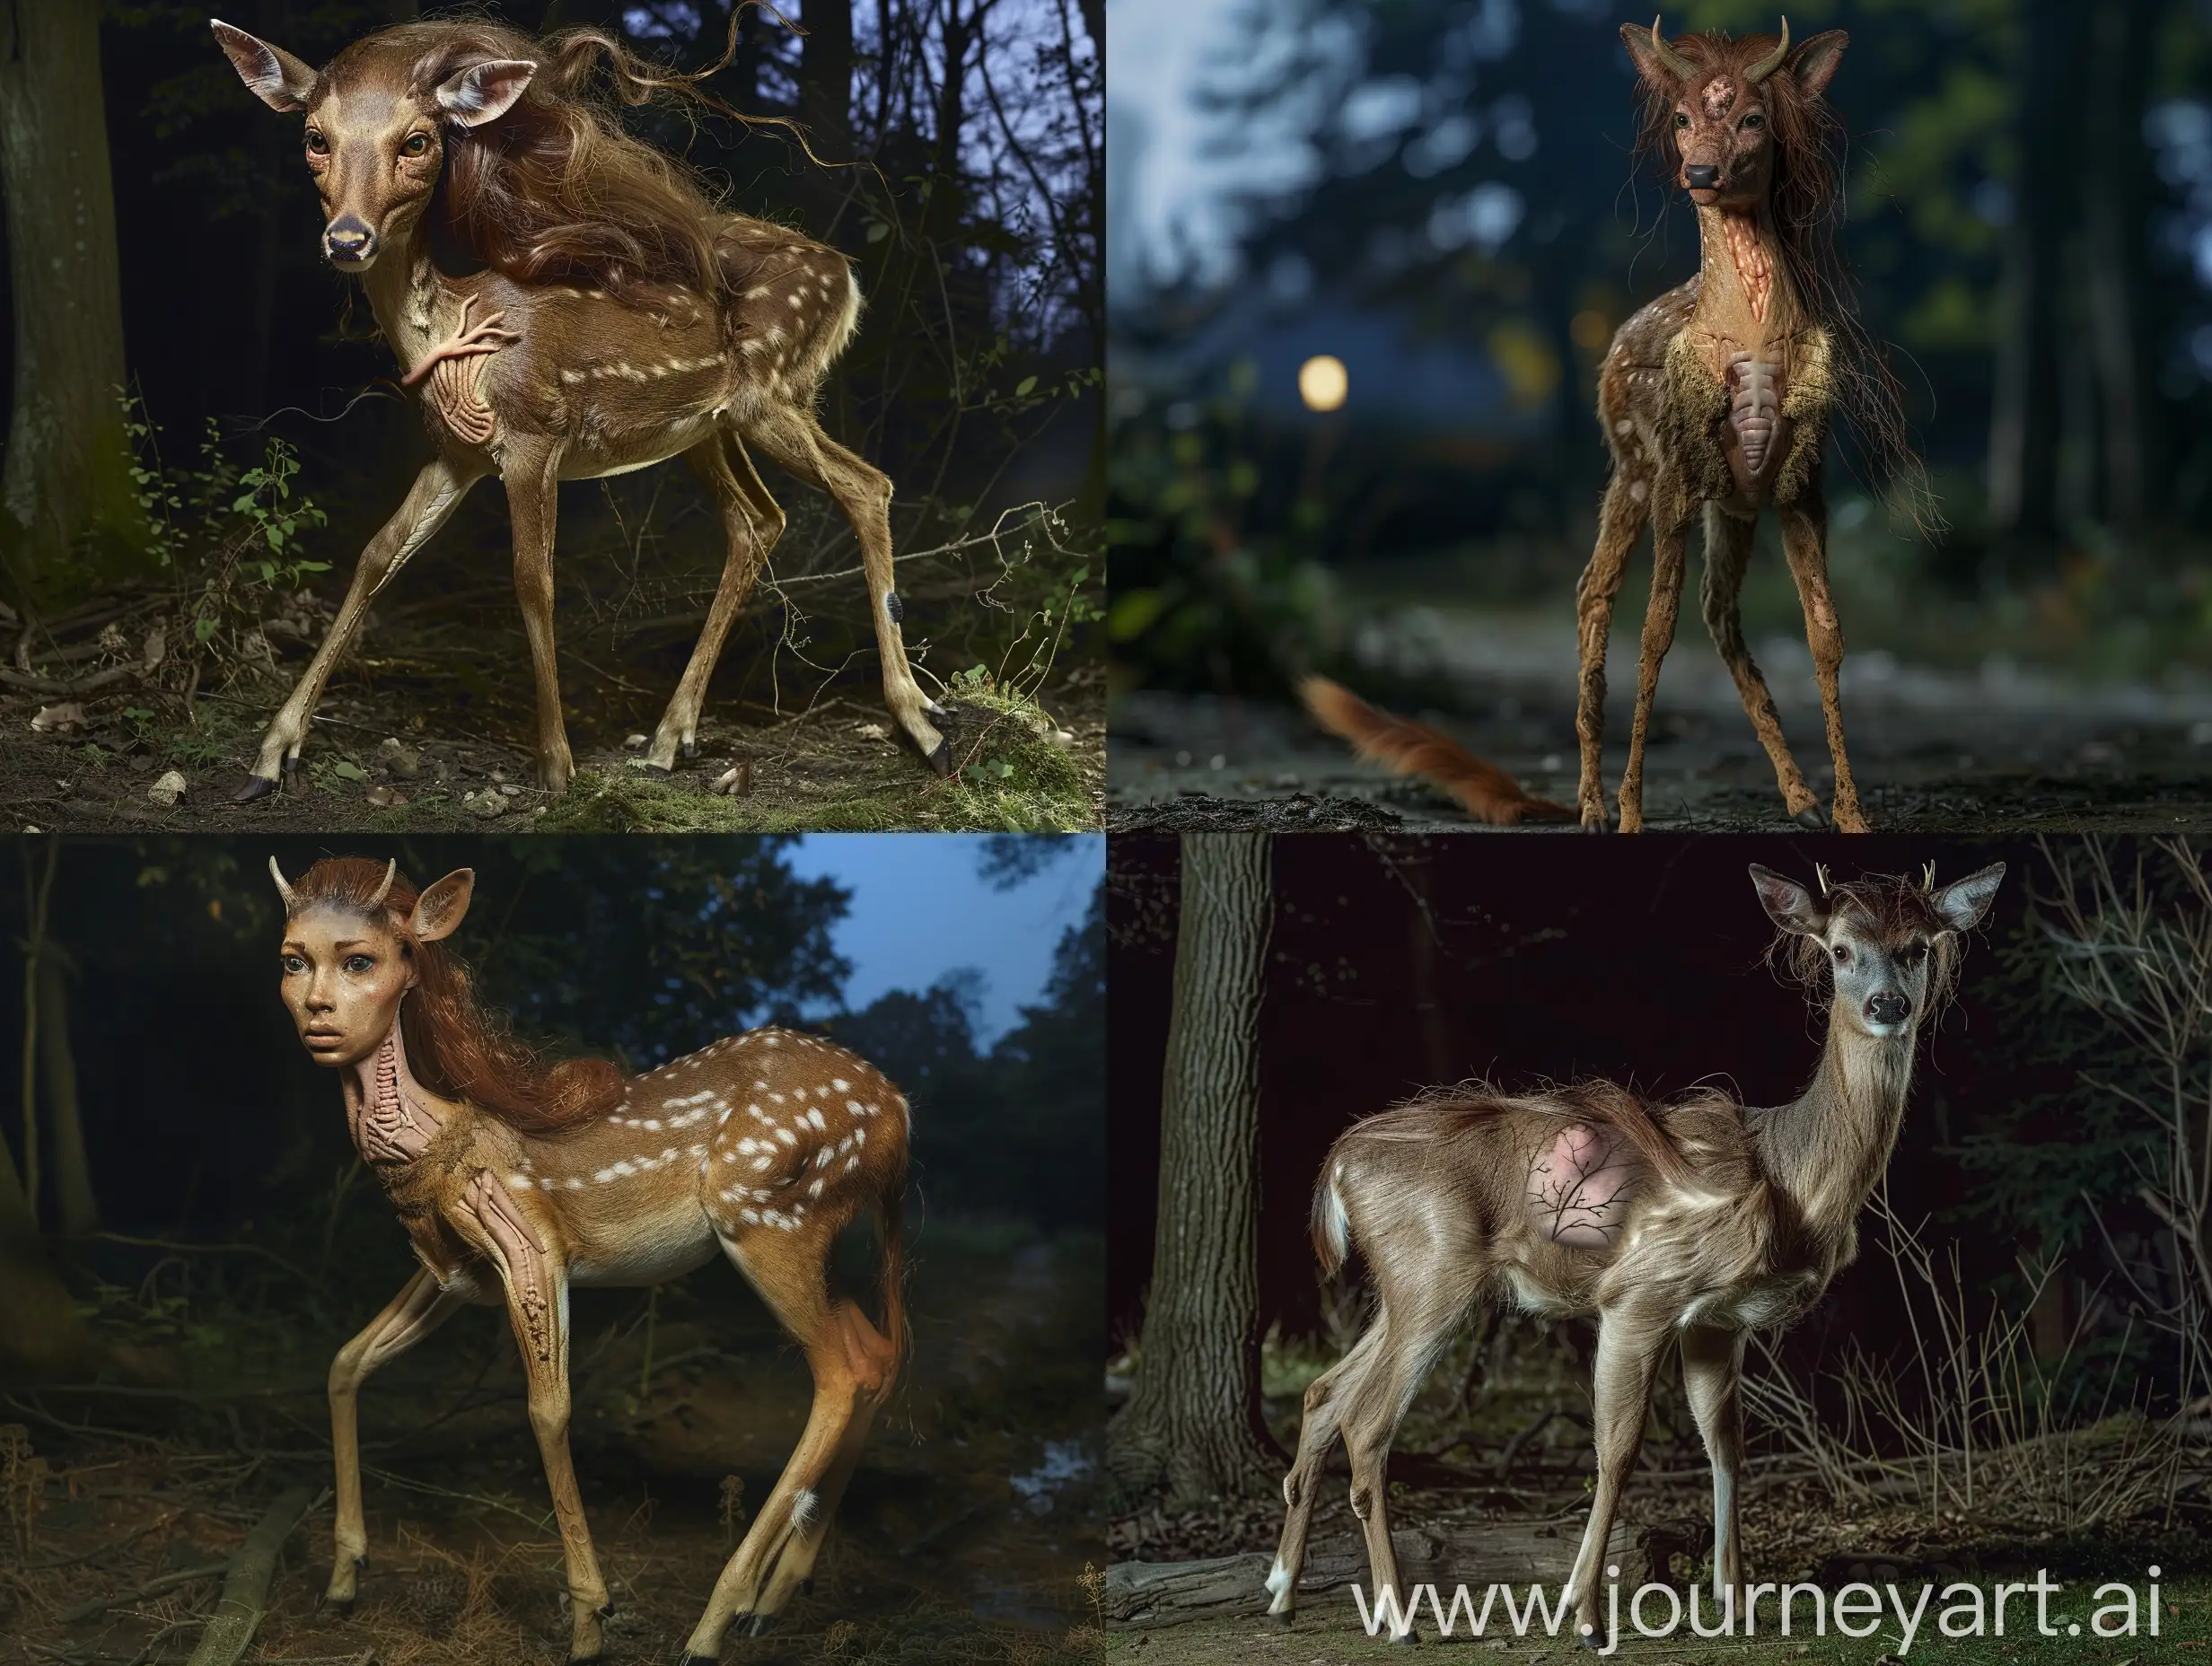 A deer. She has loose brown hair, a human face and a chest. She has hooves, horns and a tail. She is standing on all fours in a forest at night. She has hooves for feet. Realistic photograph, full body picture.